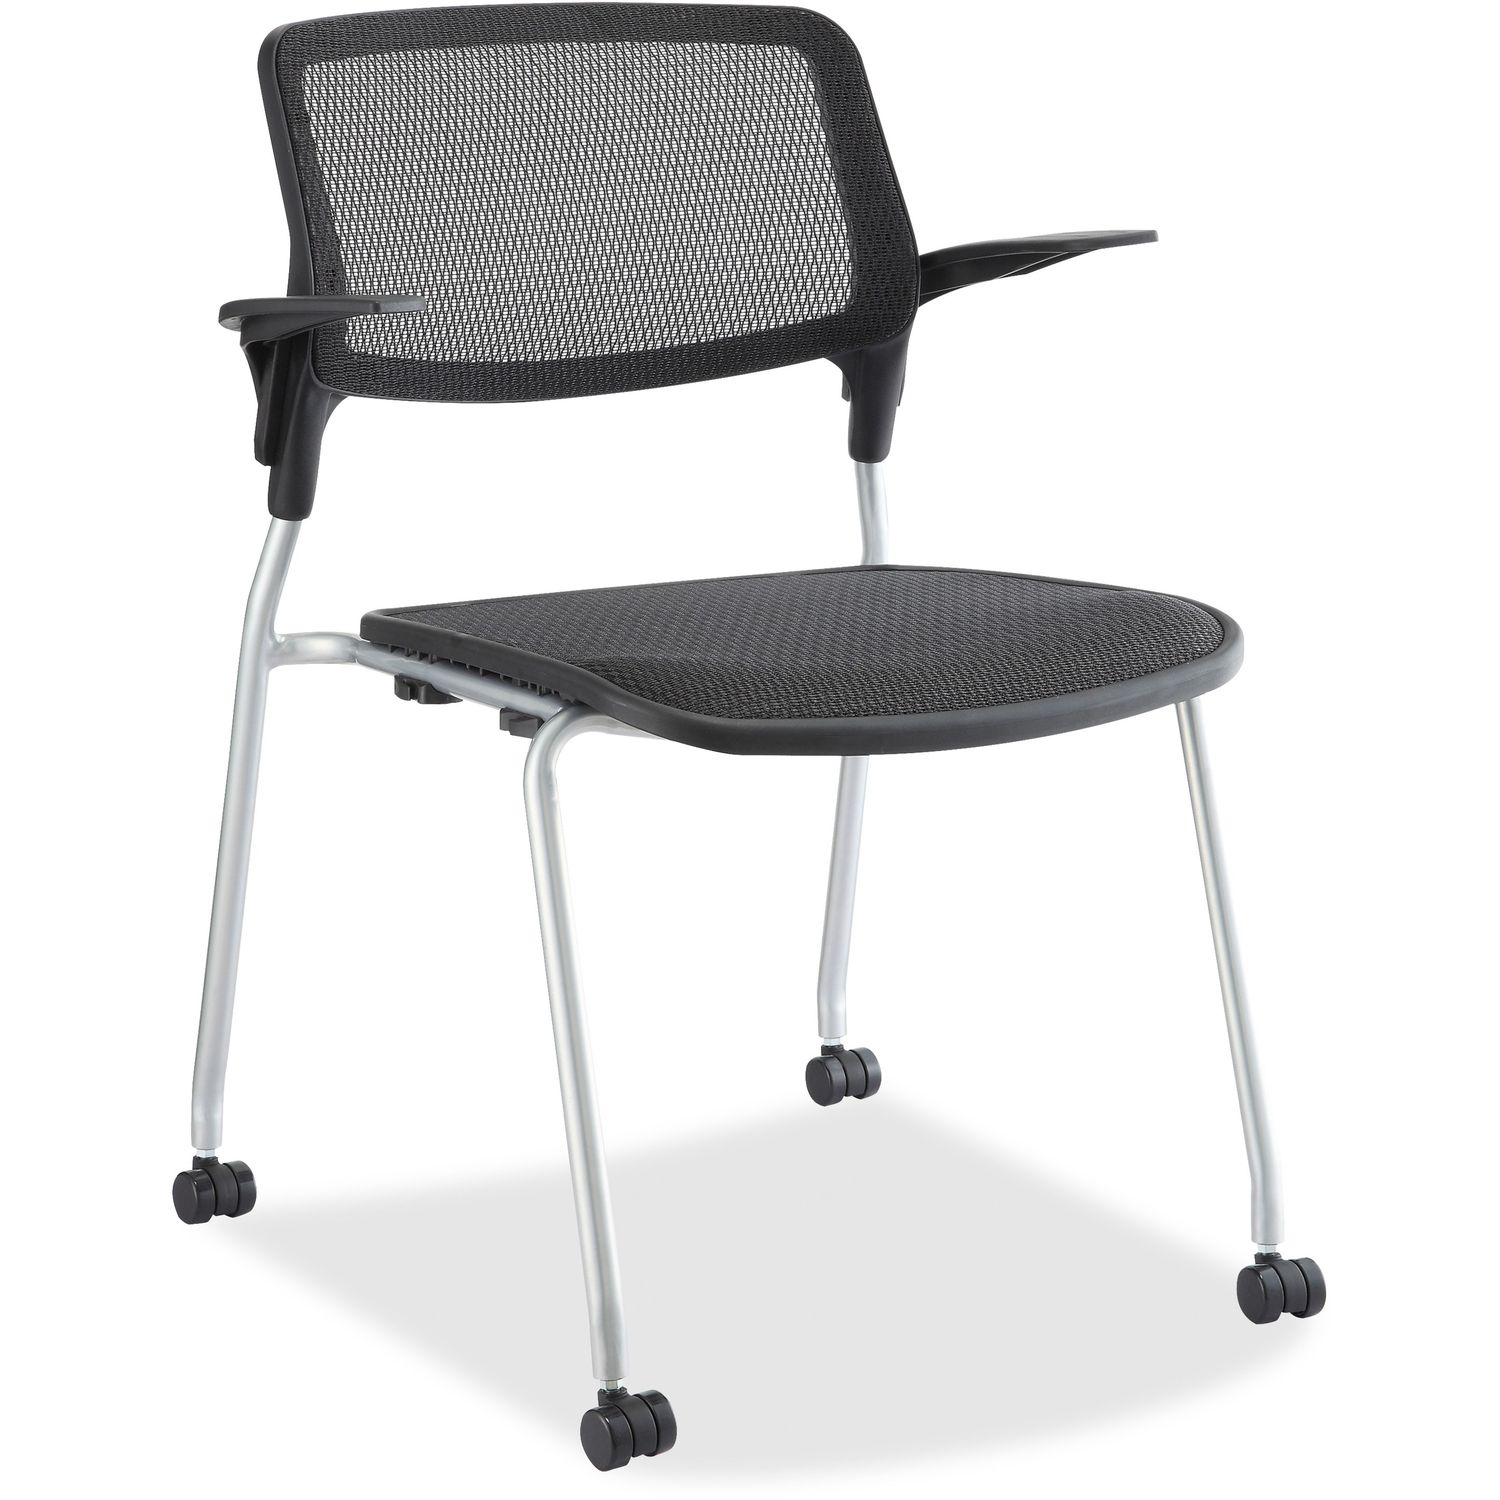 Fixed Arms Stackable Guest Chairs Black Seat, Black Back, Powder Coated Metal Frame, Four-legged Base, Yes, 2 / Carton